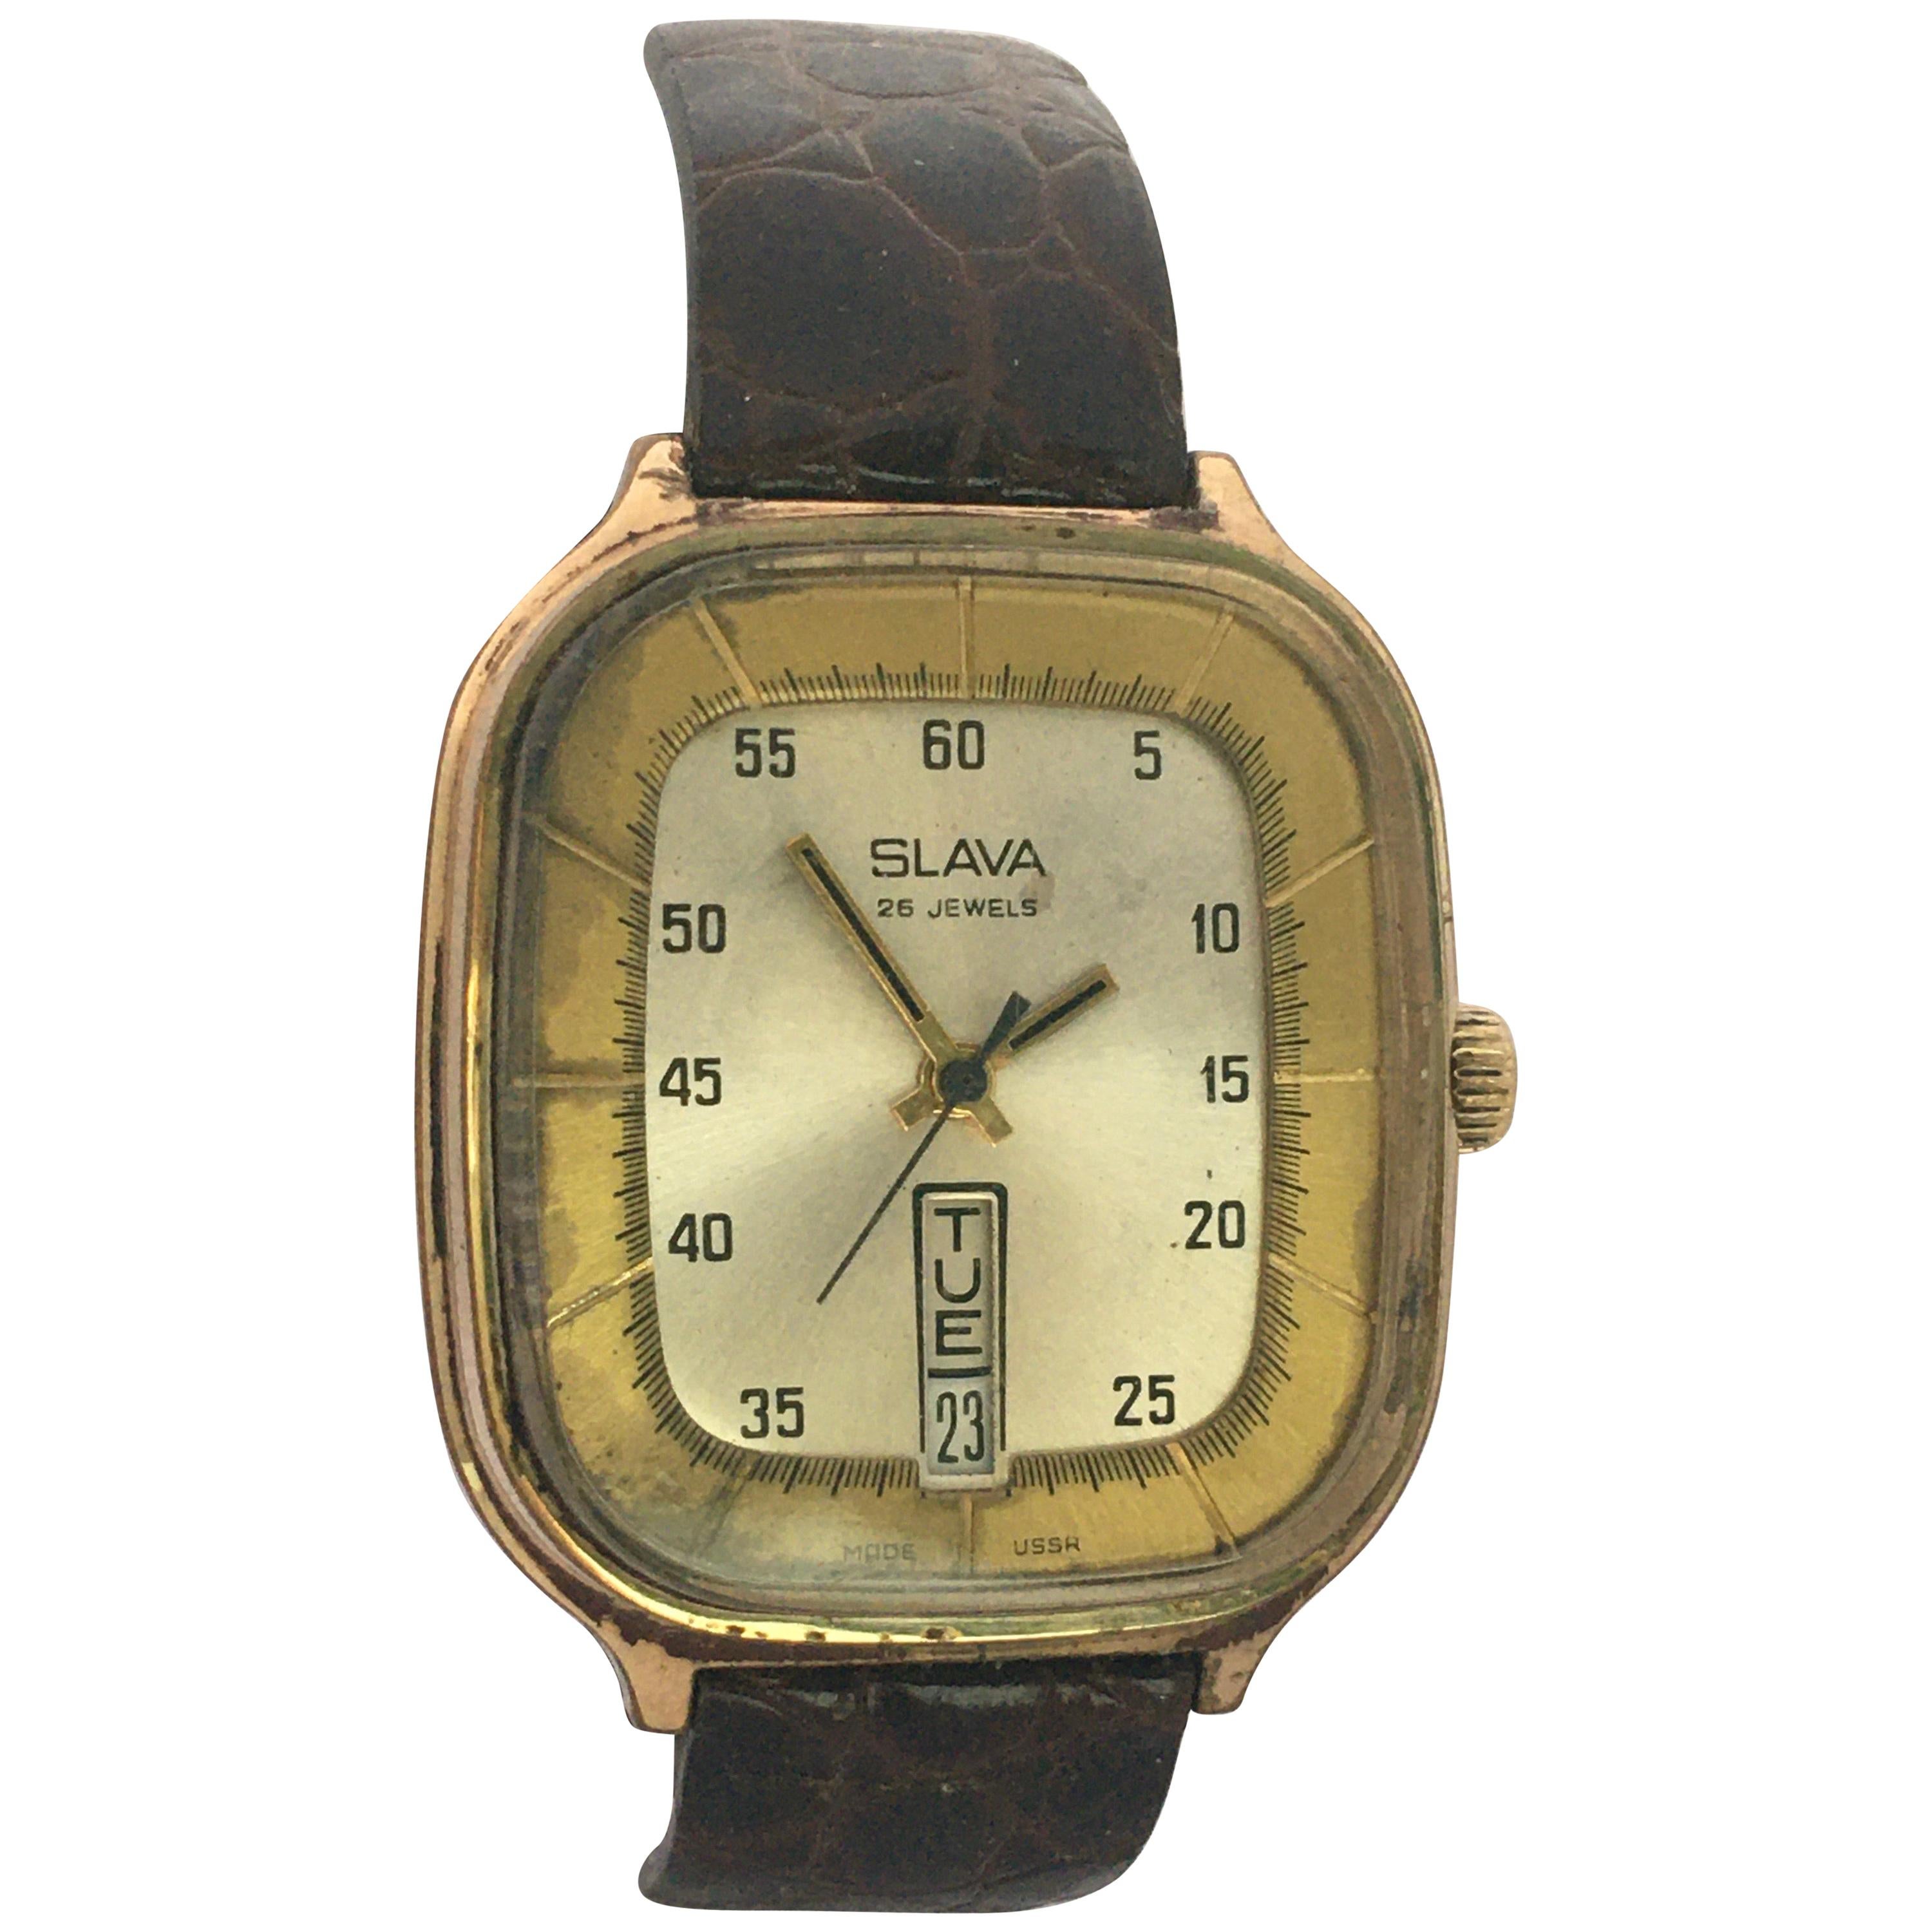 Vintage 1970s Gold-Plated Slava 26 Jewels Date Mechanical Gents Watch For Sale